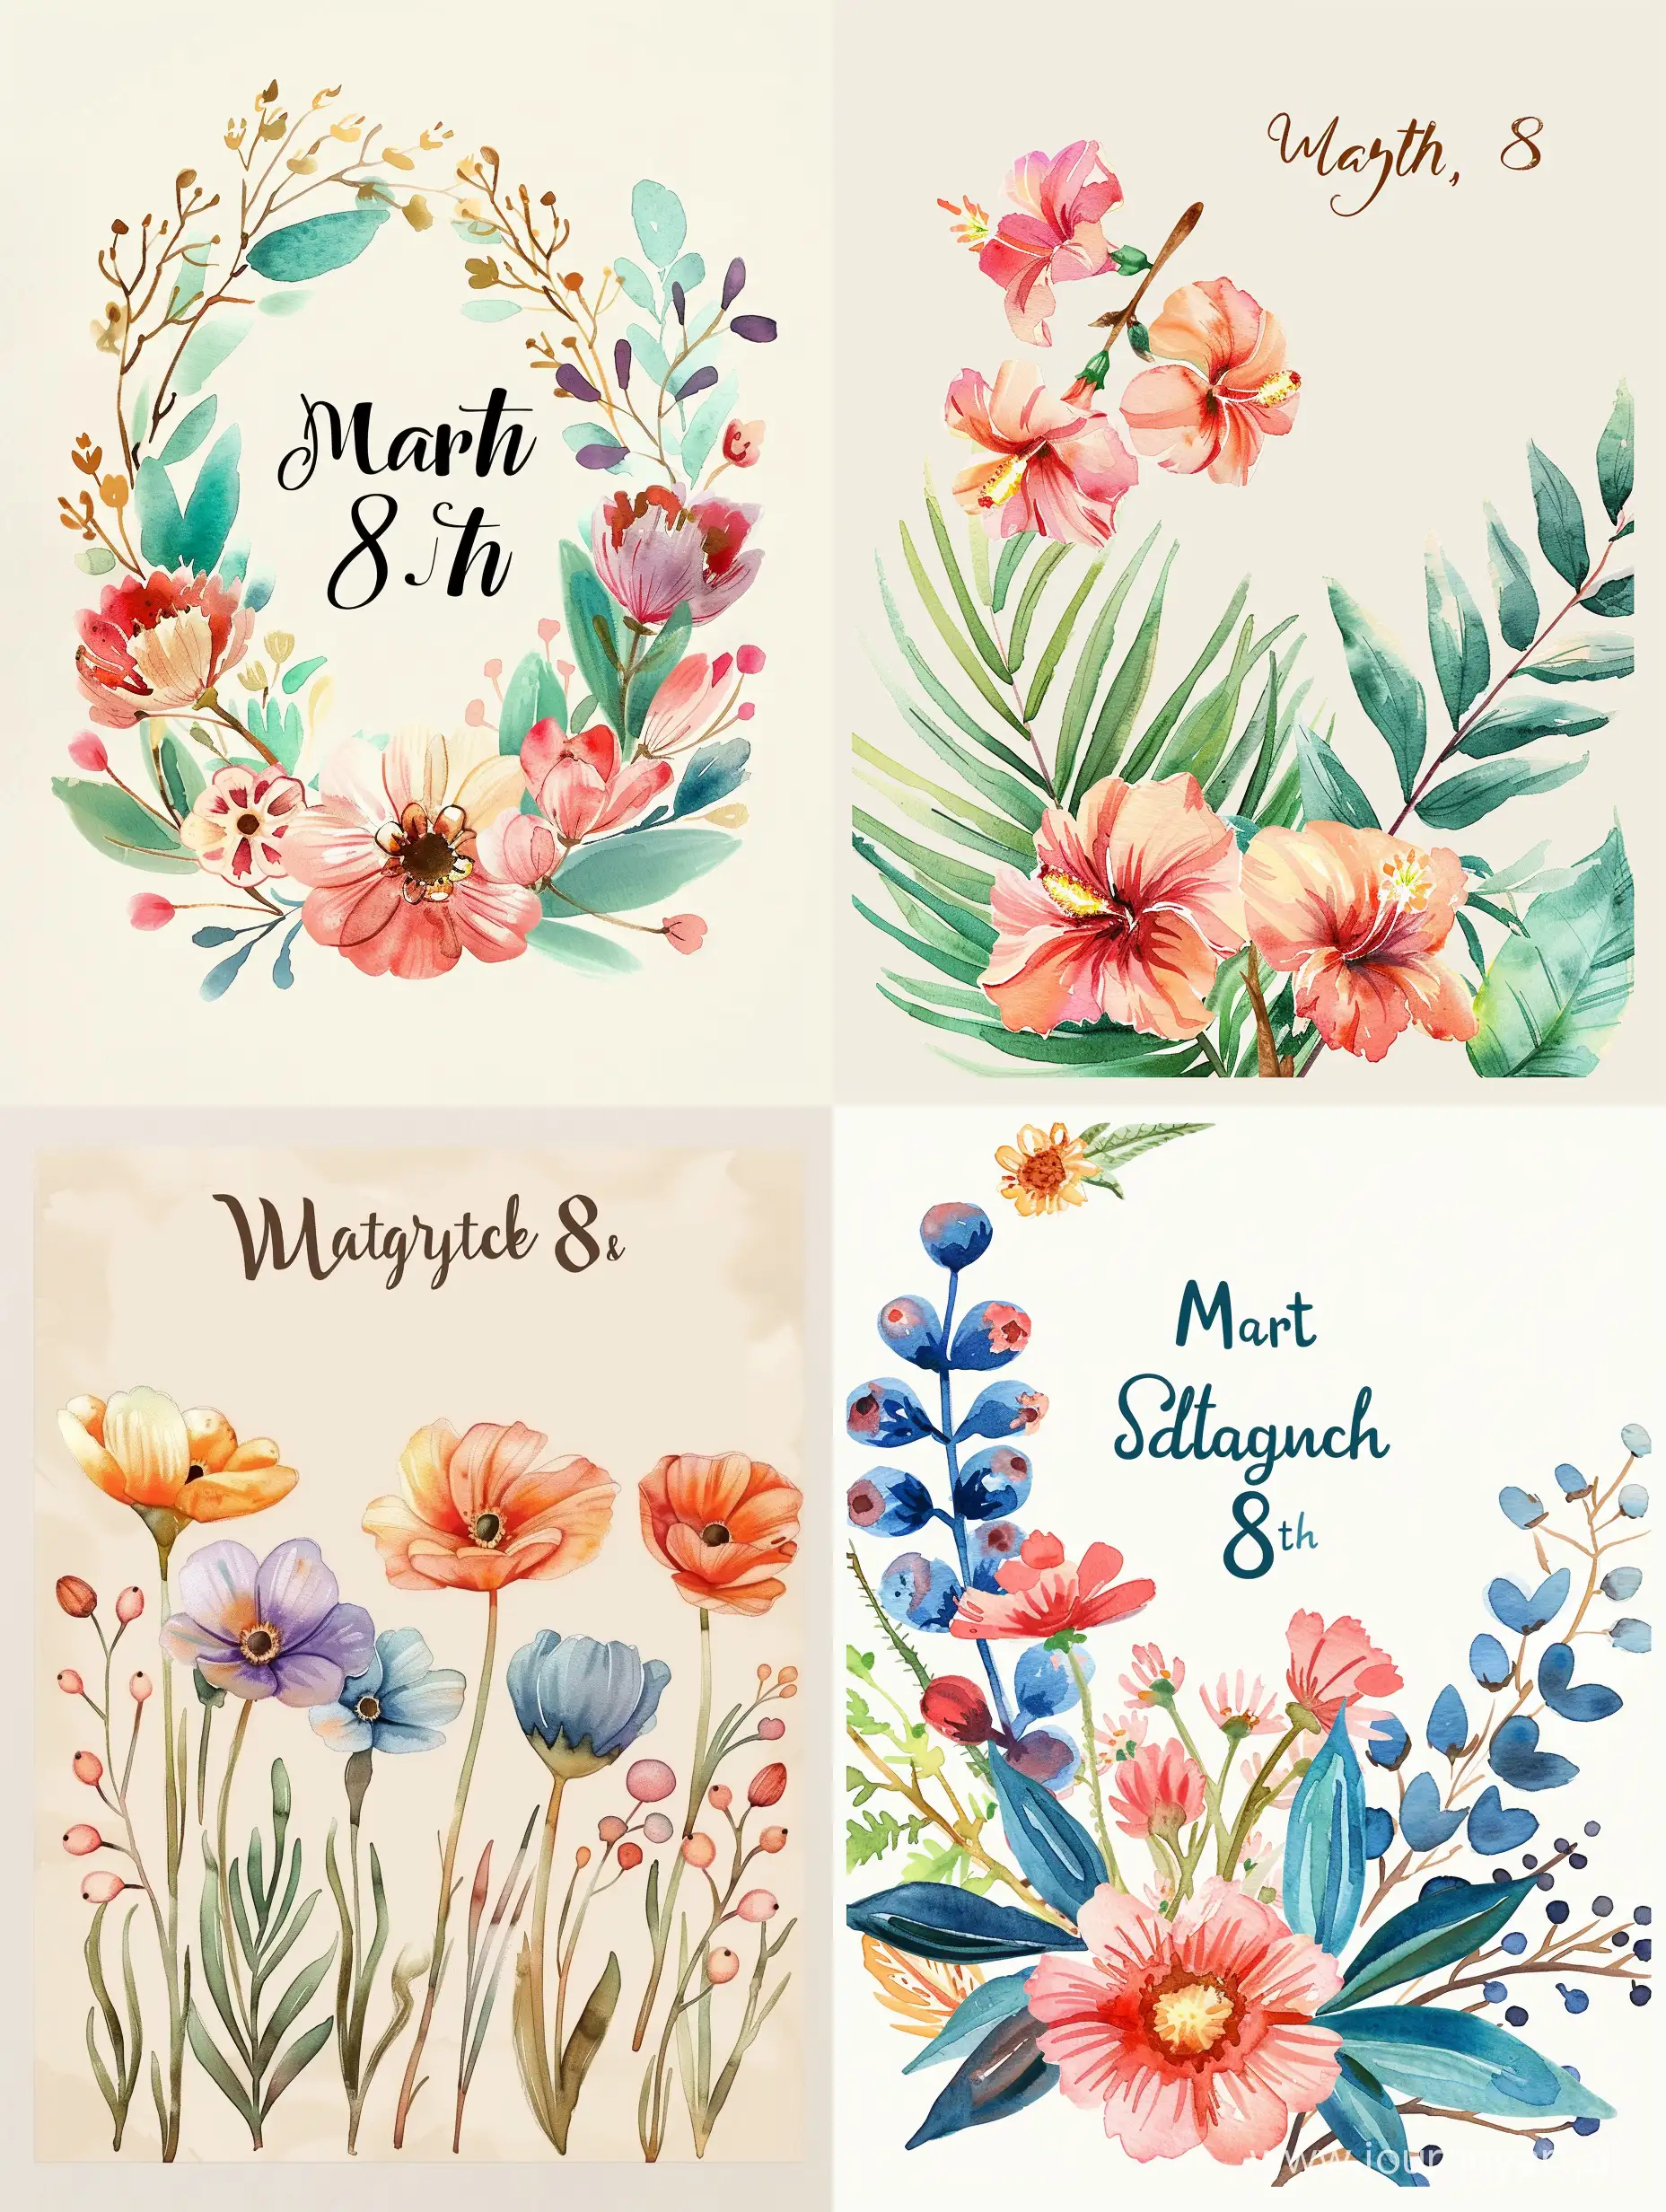 Watercolor-Poster-with-Flowers-and-Congratulations-for-March-8th-Celebration